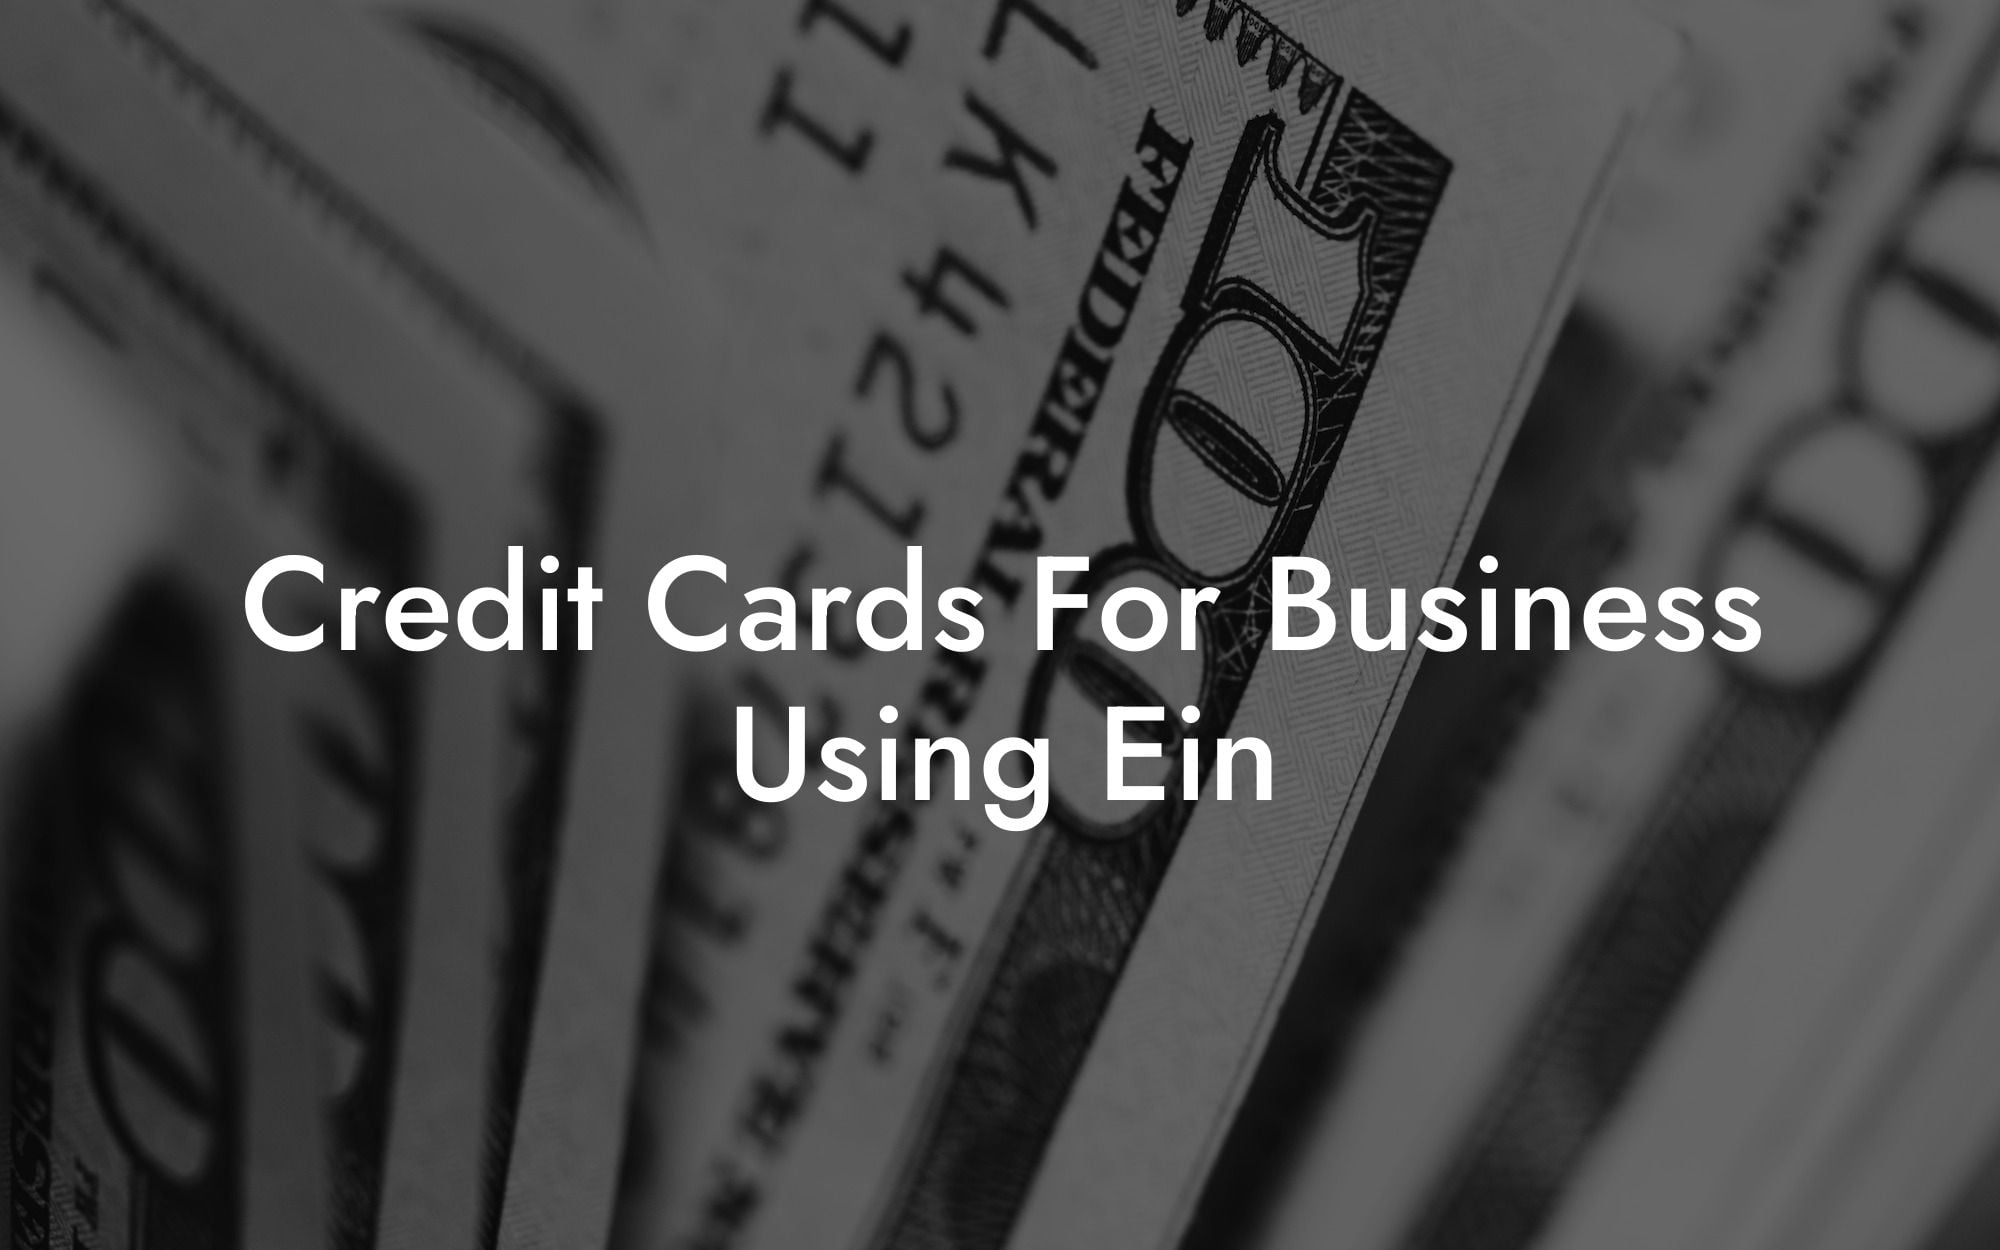 Credit Cards For Business Using Ein